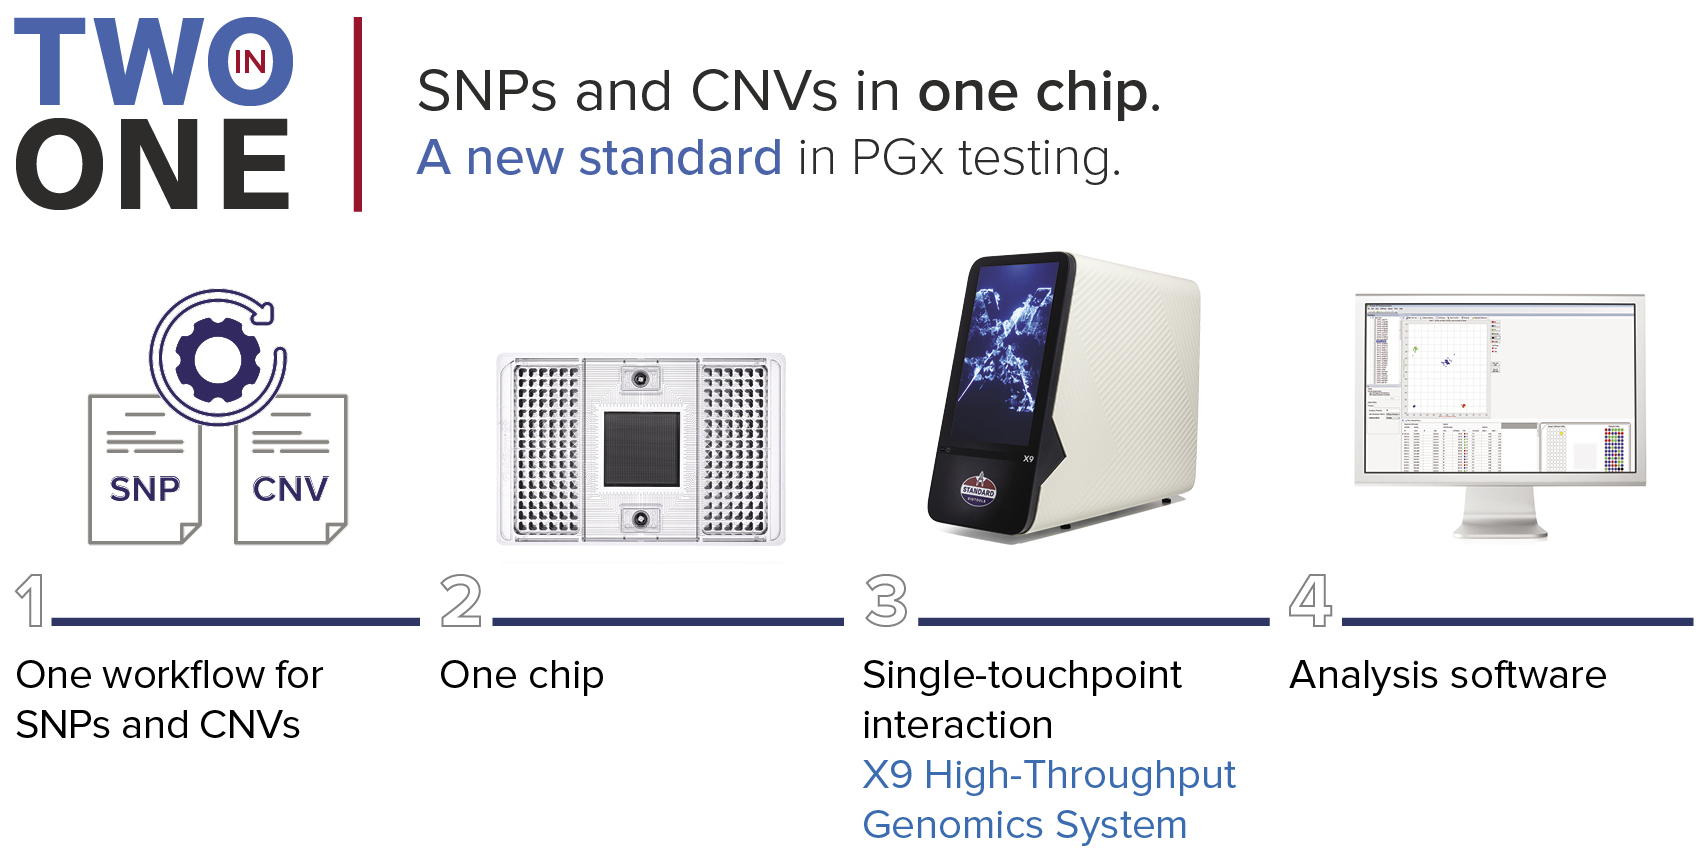 TWO in ONE. SNPs and CNVs in ONE plate. A new standard in PGx testing.